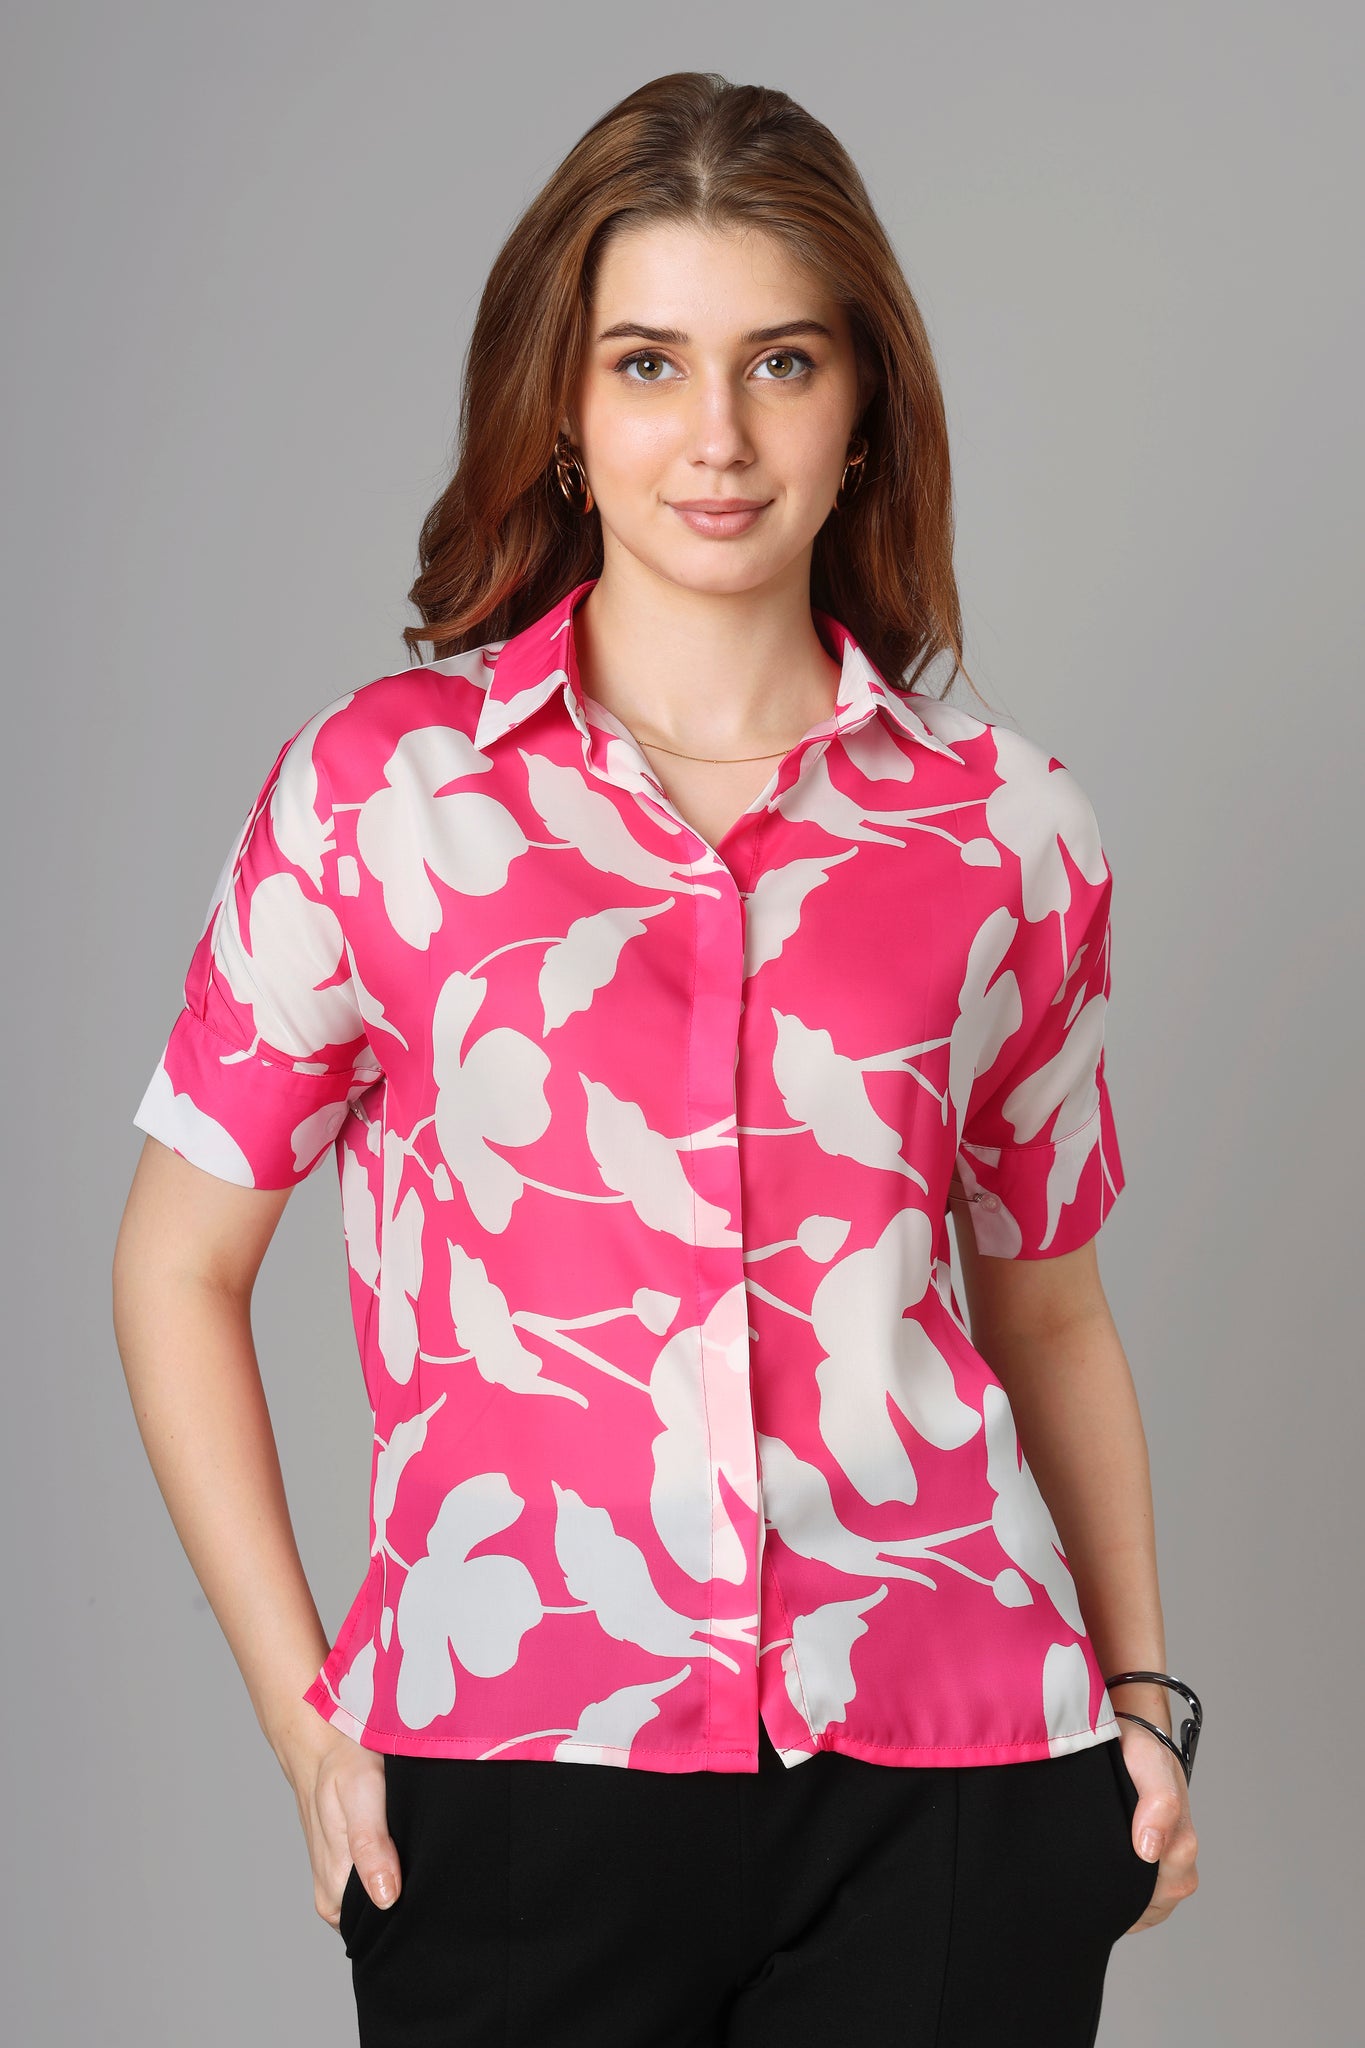 Attractive Pink Floral Top For Women